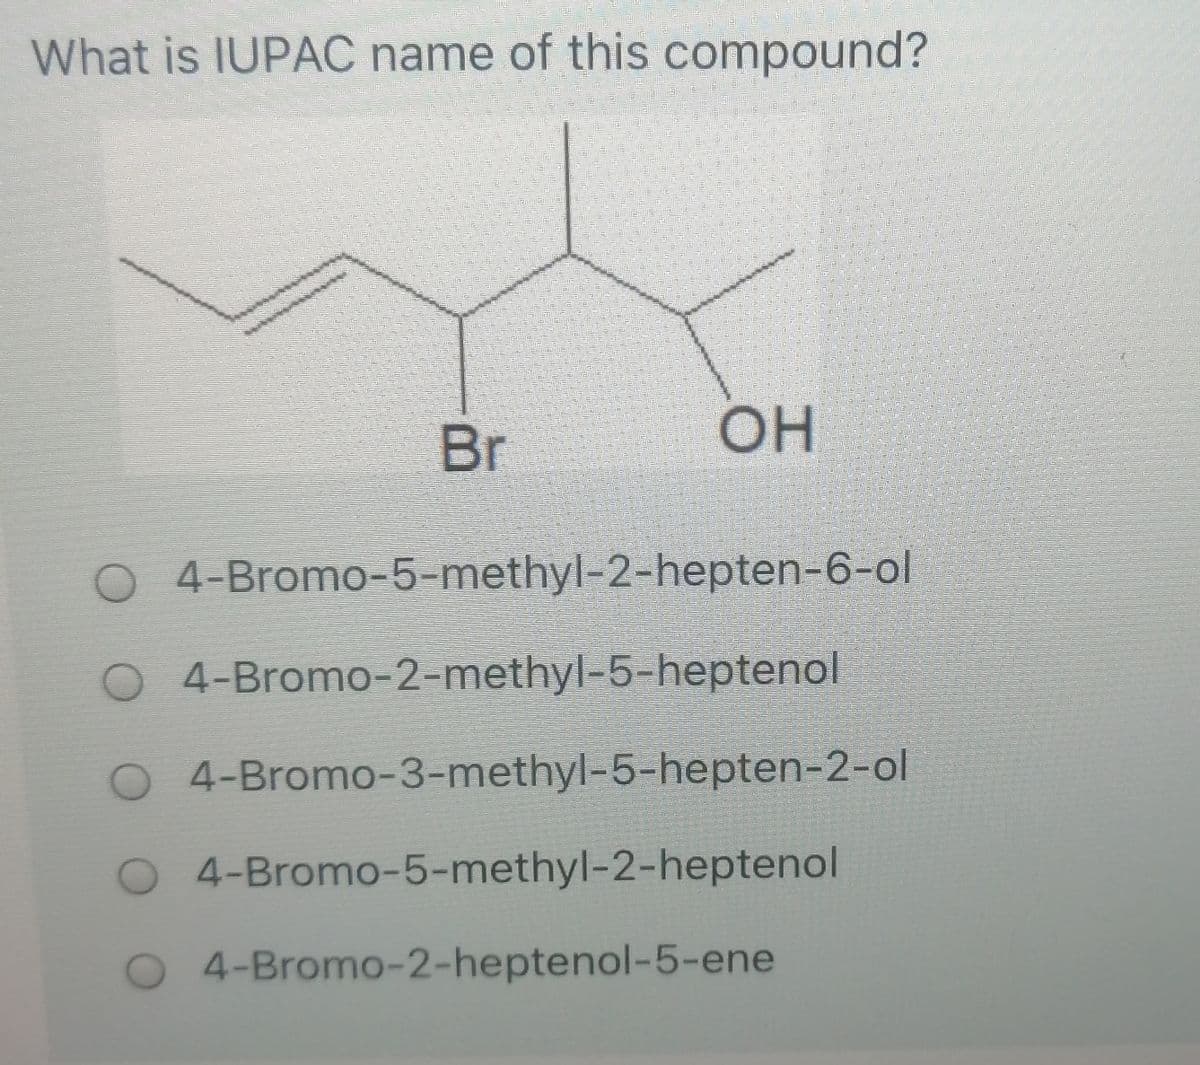 What is IUPAC name of this compound?
Br
OH
O 4-Bromo-5-methyl-2-hepten-6-ol
O 4-Bromo-2-methyl-5-heptenol
O 4-Bromo-3-methyl-5-hepten-2-ol
4-Bromo-5-methyl-2-heptenol
O 4-Bromo-2-heptenol-5-ene
